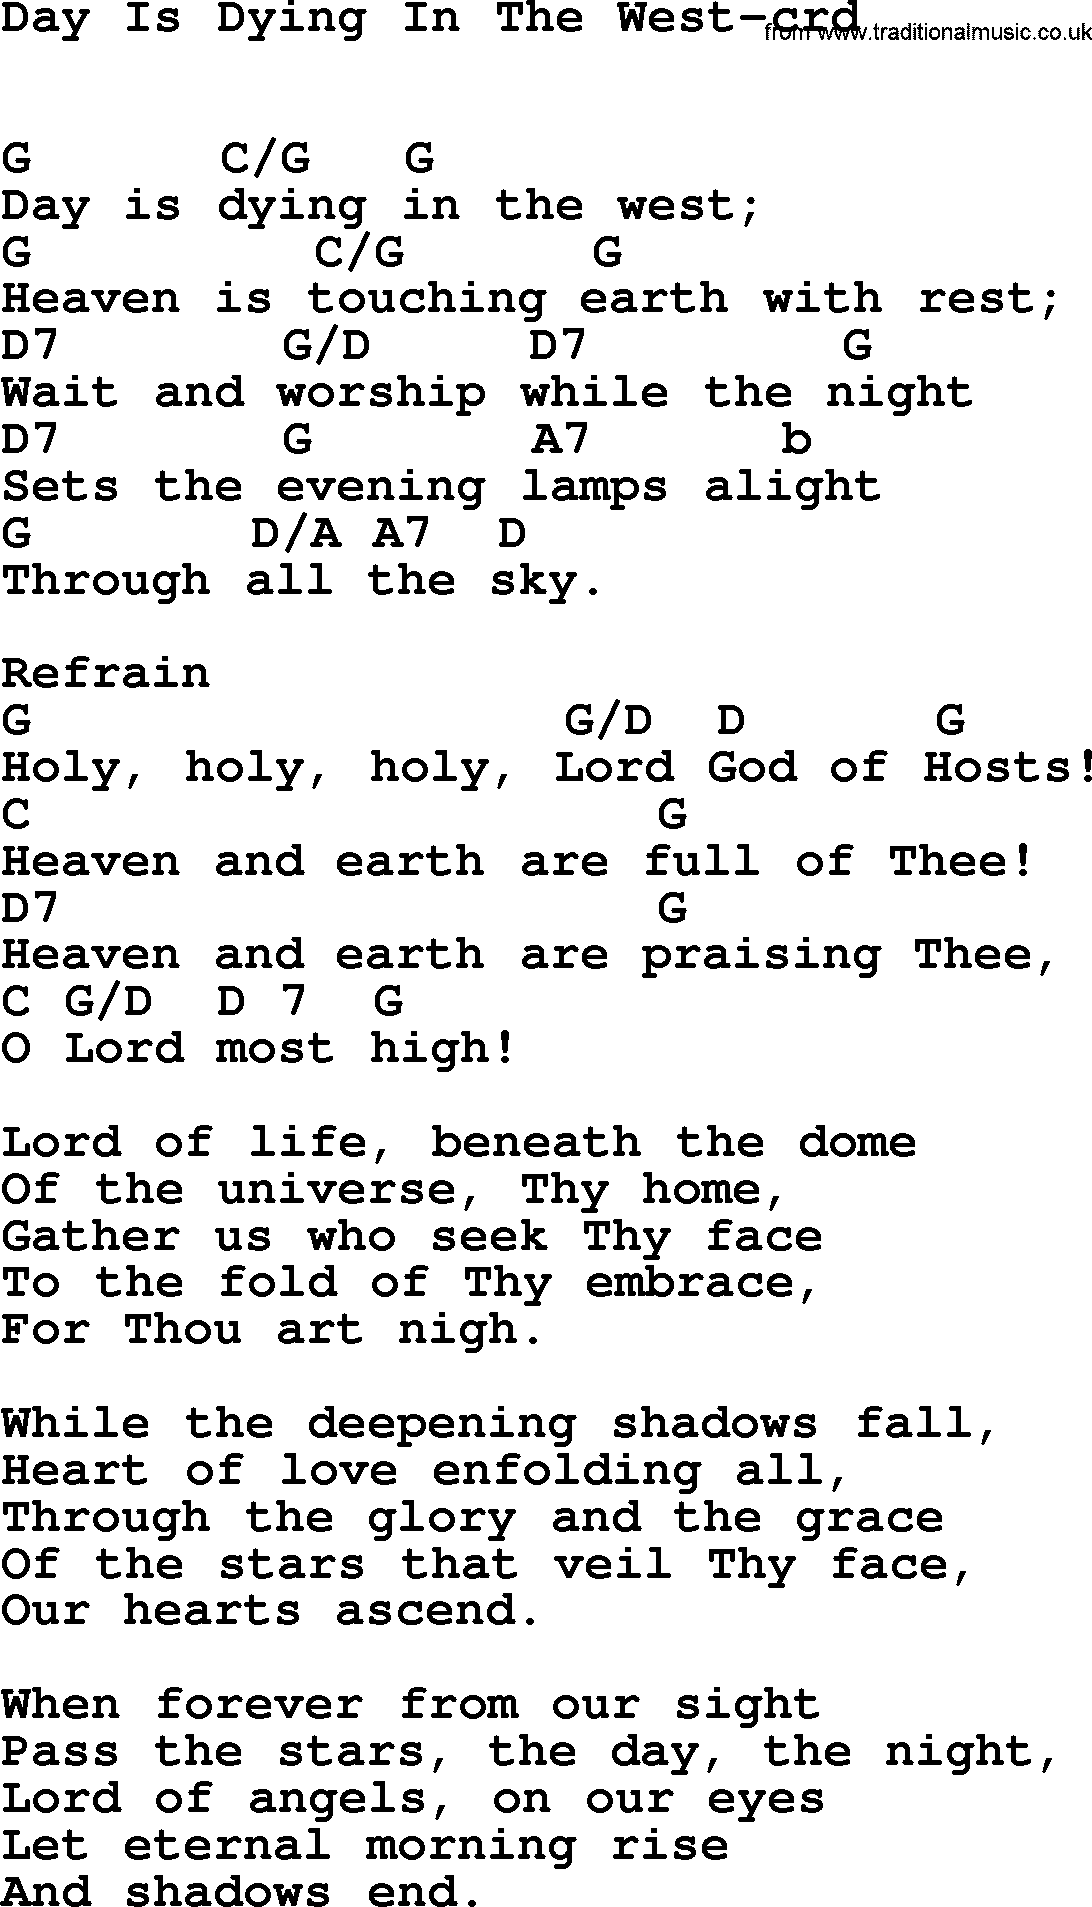 Top 500 Hymn: Day Is Dying In The West, lyrics and chords